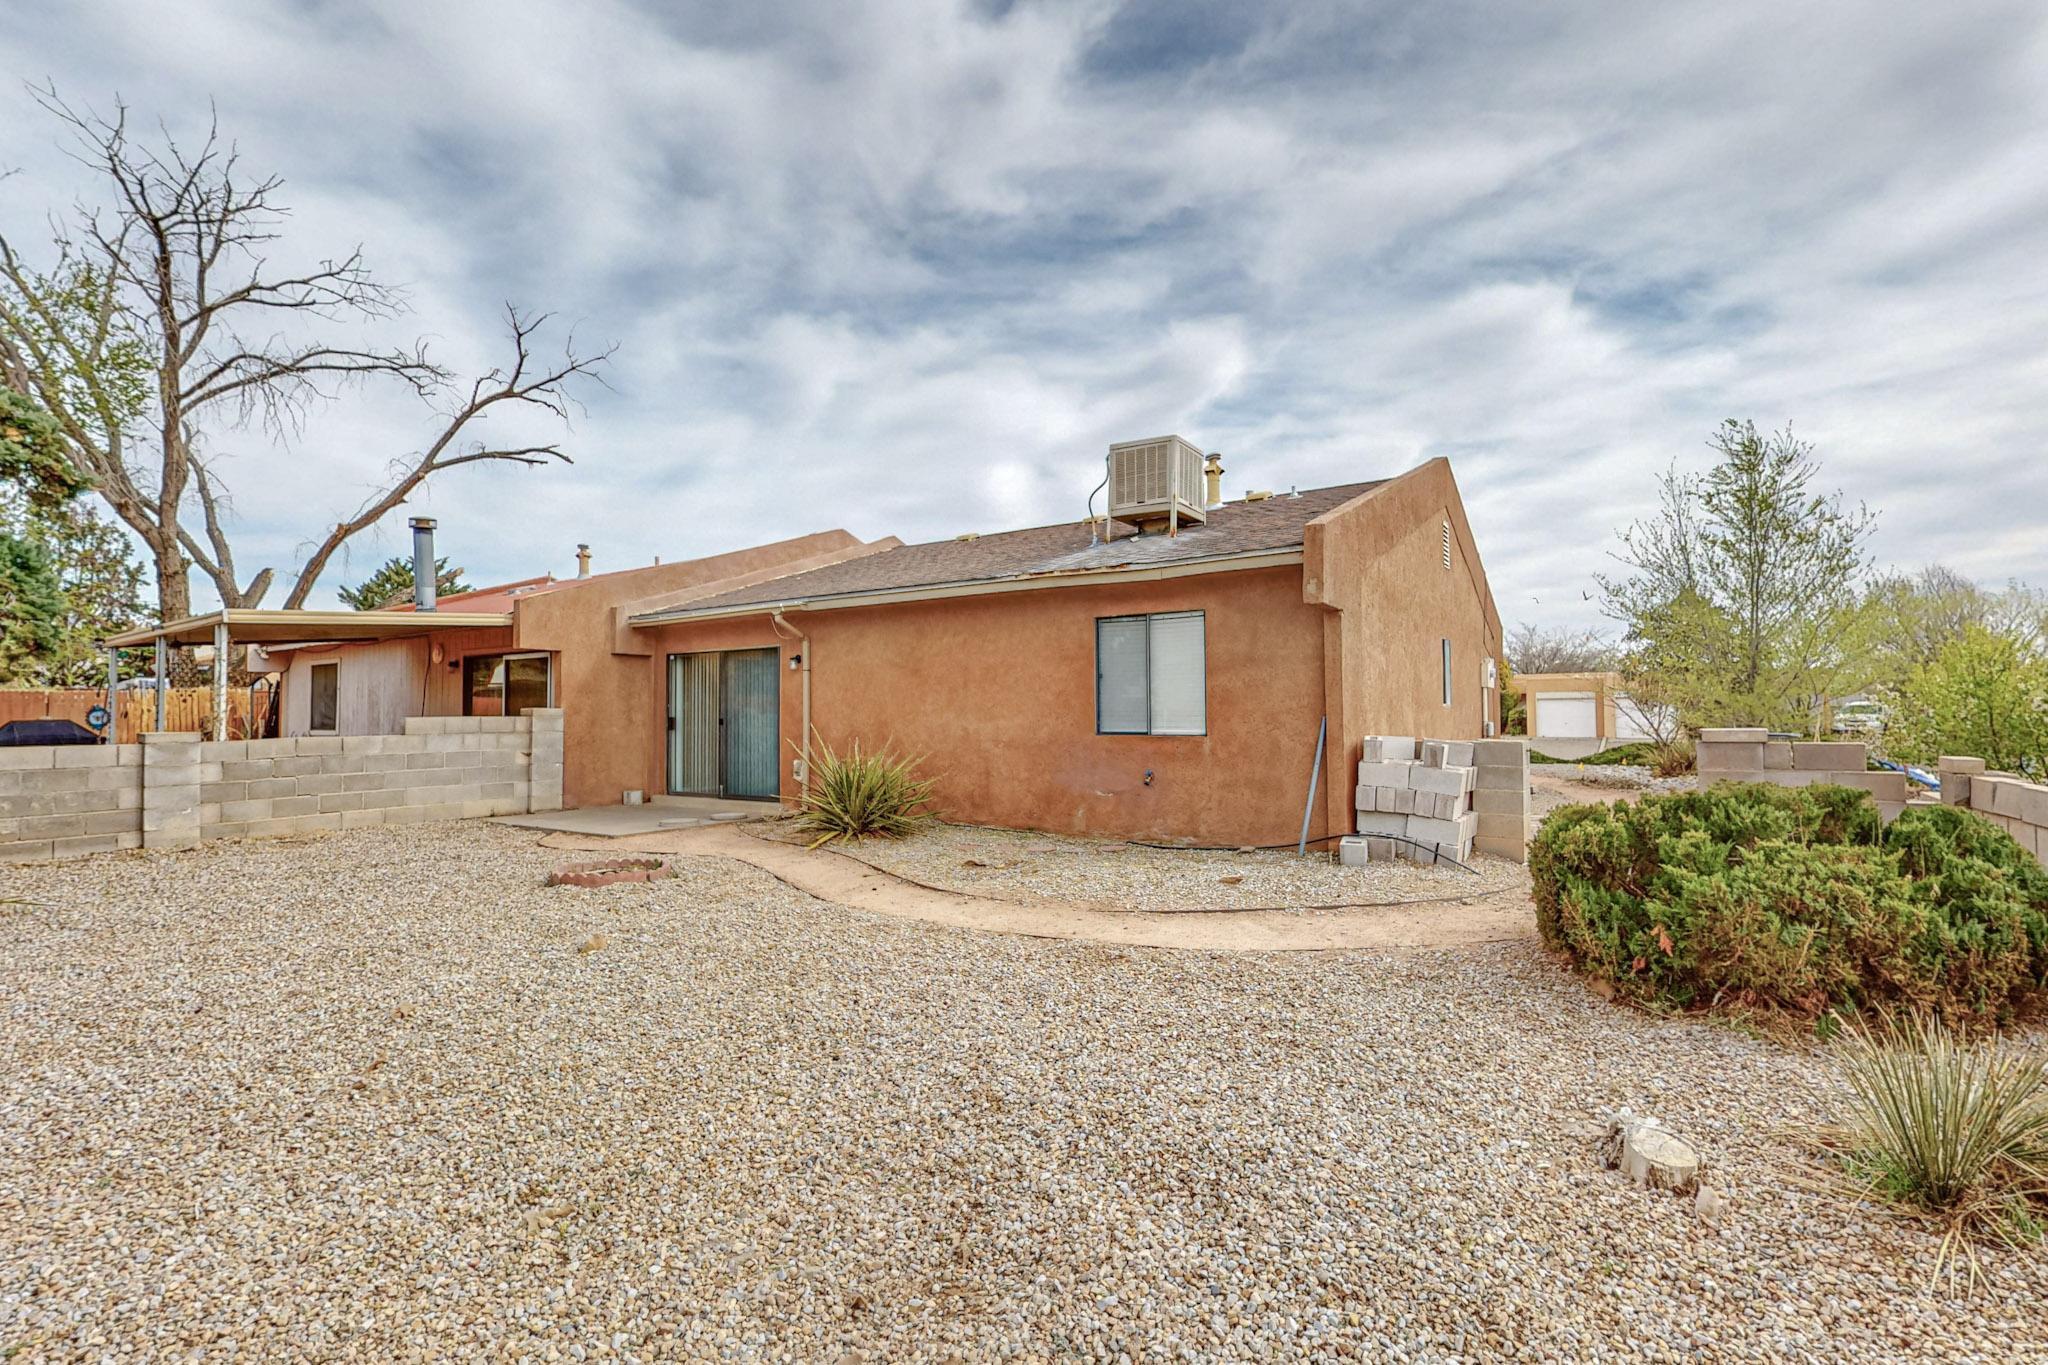 747 Stallion Road SE, Rio Rancho, New Mexico 87124, 2 Bedrooms Bedrooms, ,1 BathroomBathrooms,Residential,For Sale,747 Stallion Road SE,1060246